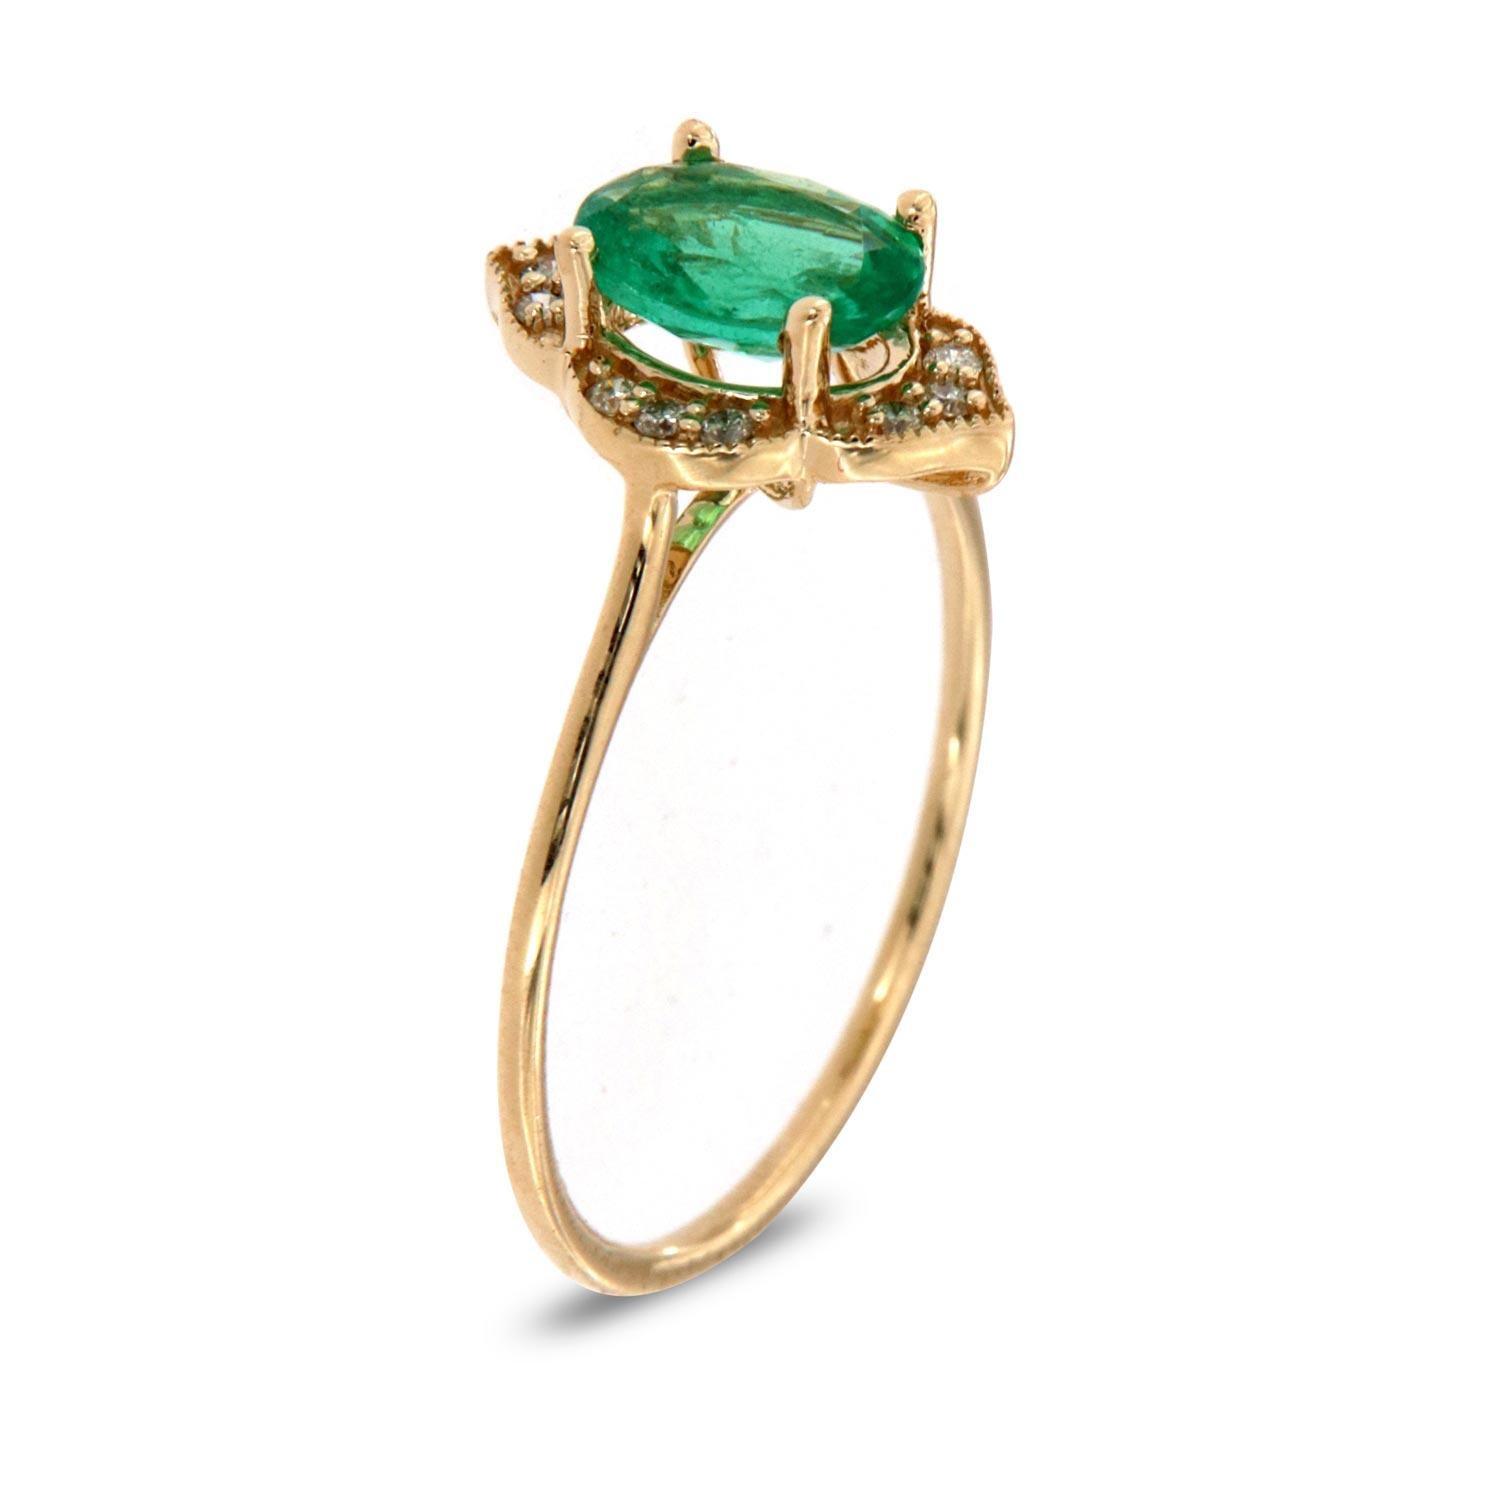 This petite fashion ring is impressive in its vintage appeal, featuring a natural green oval shape emerald, accented with milgrain and round brilliant diamonds. Experience the difference in person!

Product details: 

Center Gemstone Type: